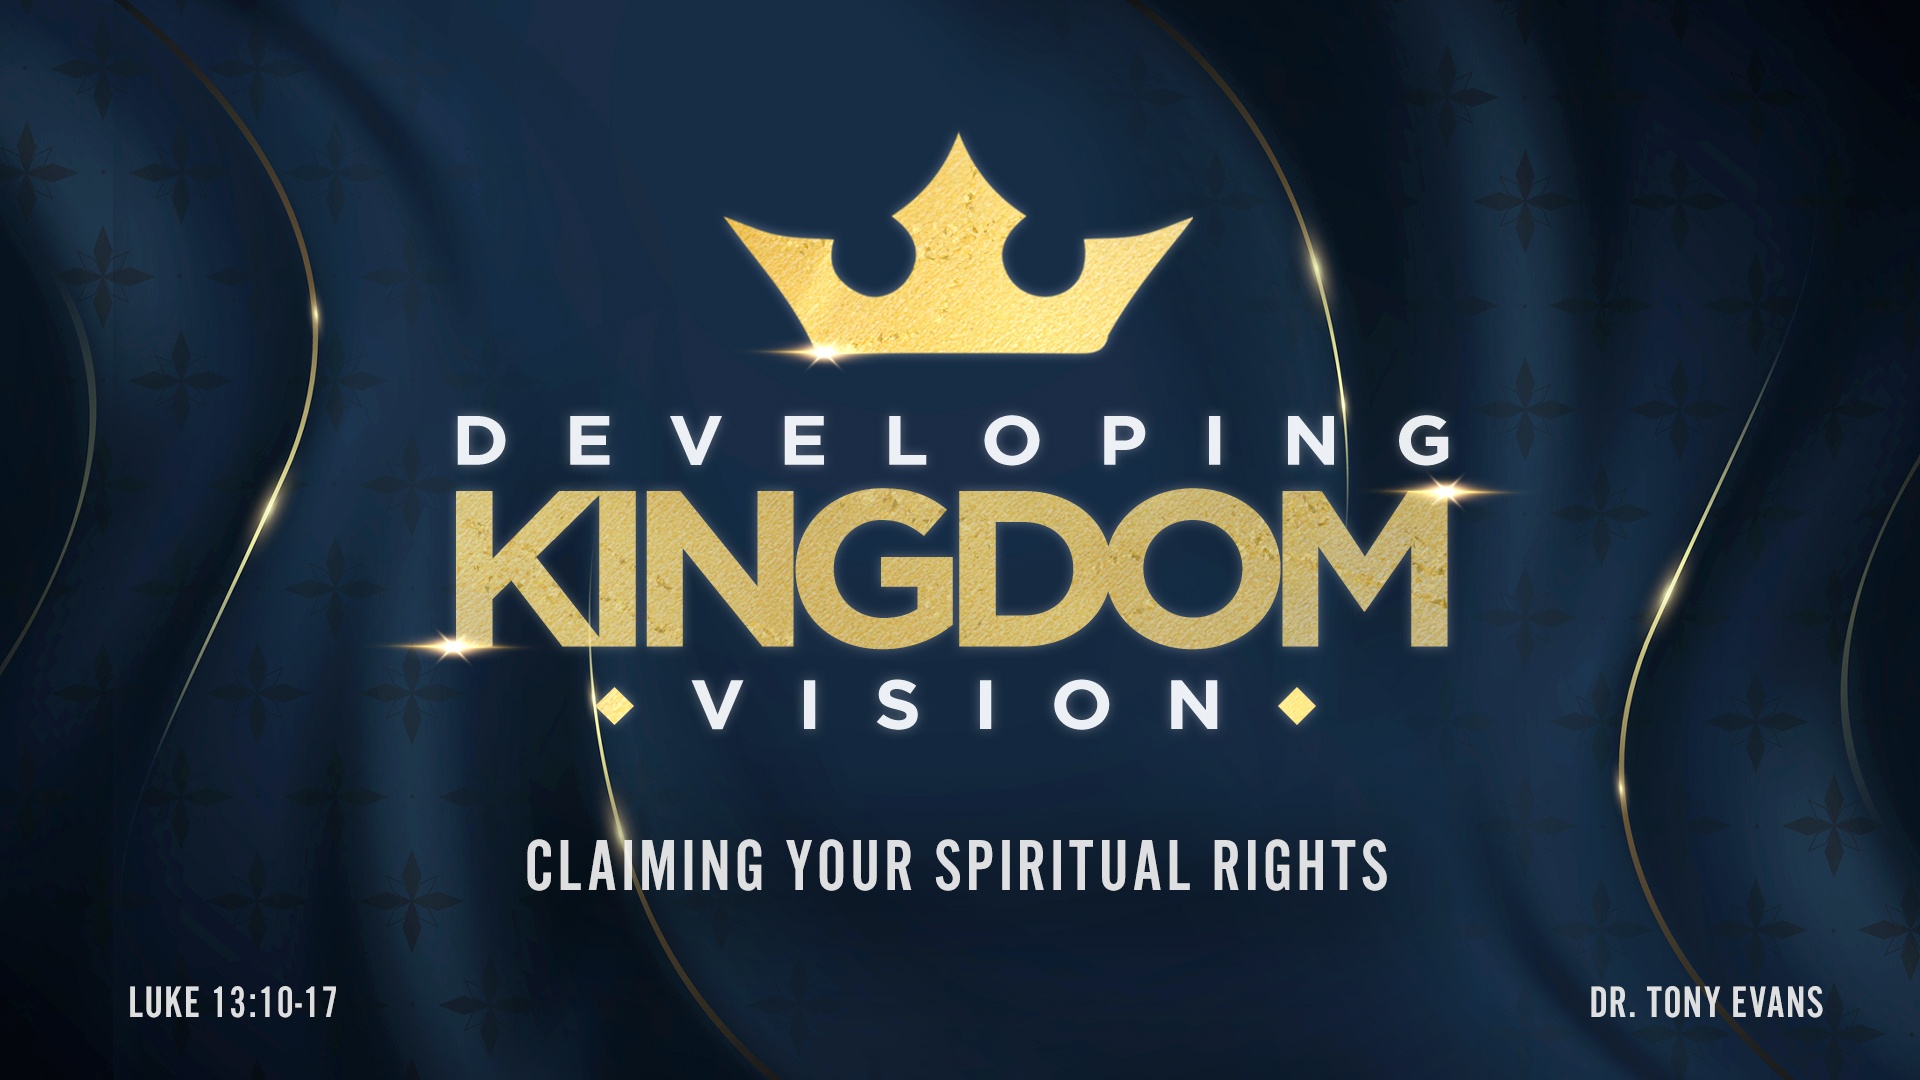 Developing Kingdom Vision Claiming Your Spiritual Rights by Dr. Tony Evans